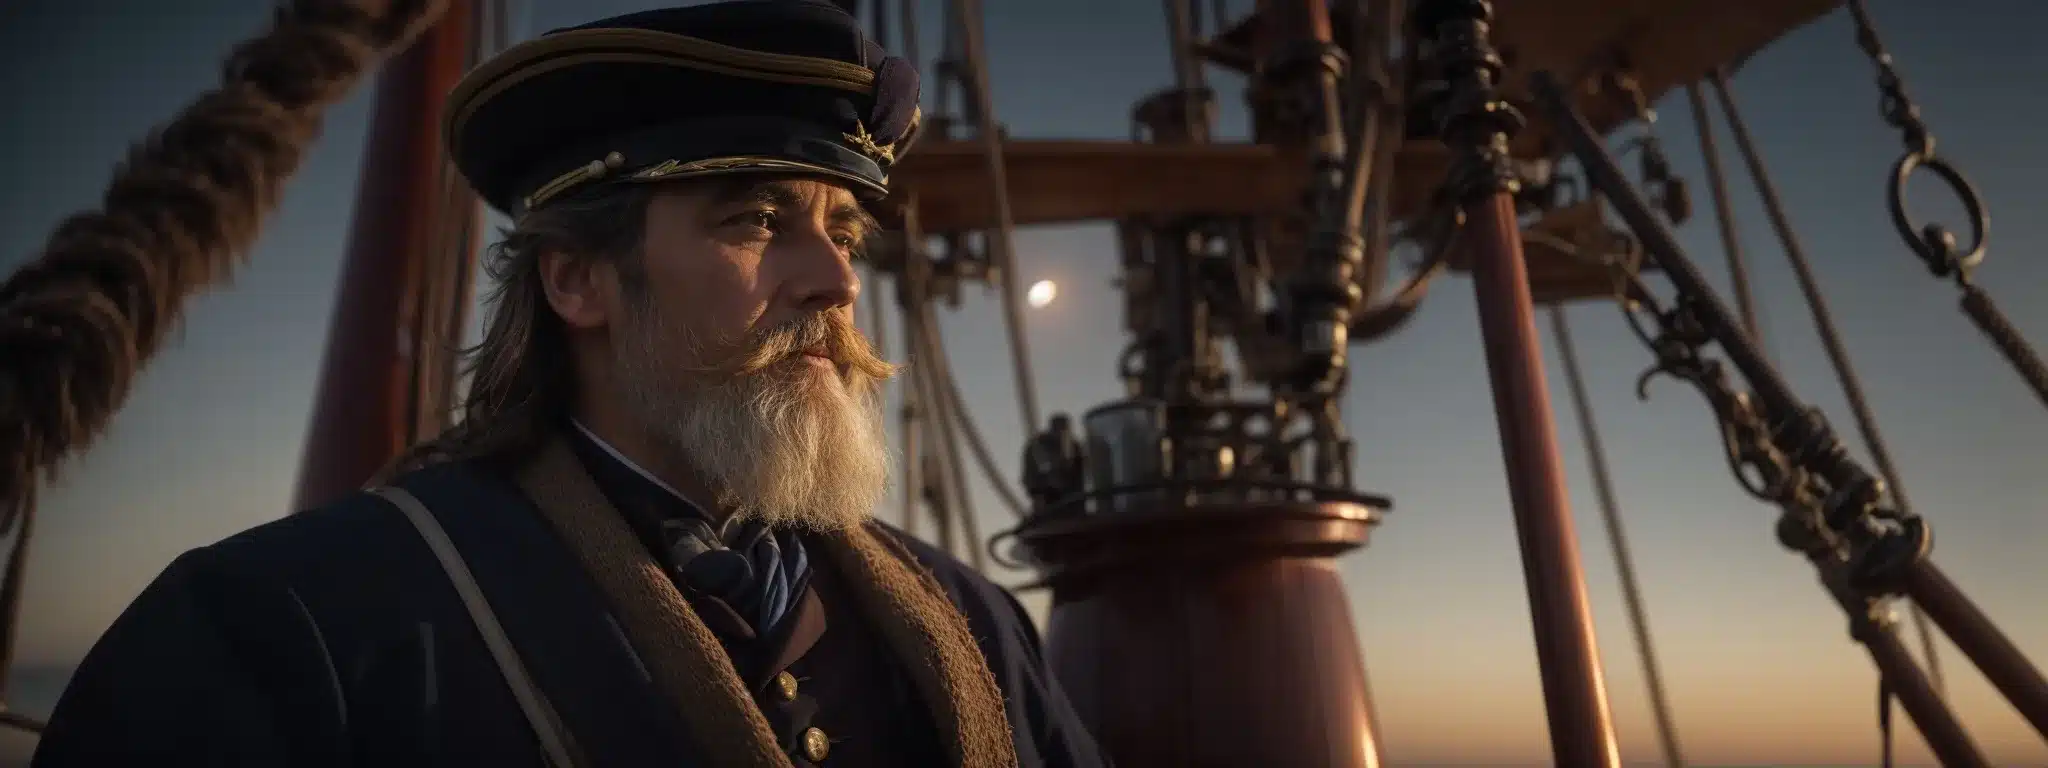 A Sea Captain Stands At The Helm Of A Ship, Charting A Course With Traditional Navigational Instruments Under A Star-Filled Sky.